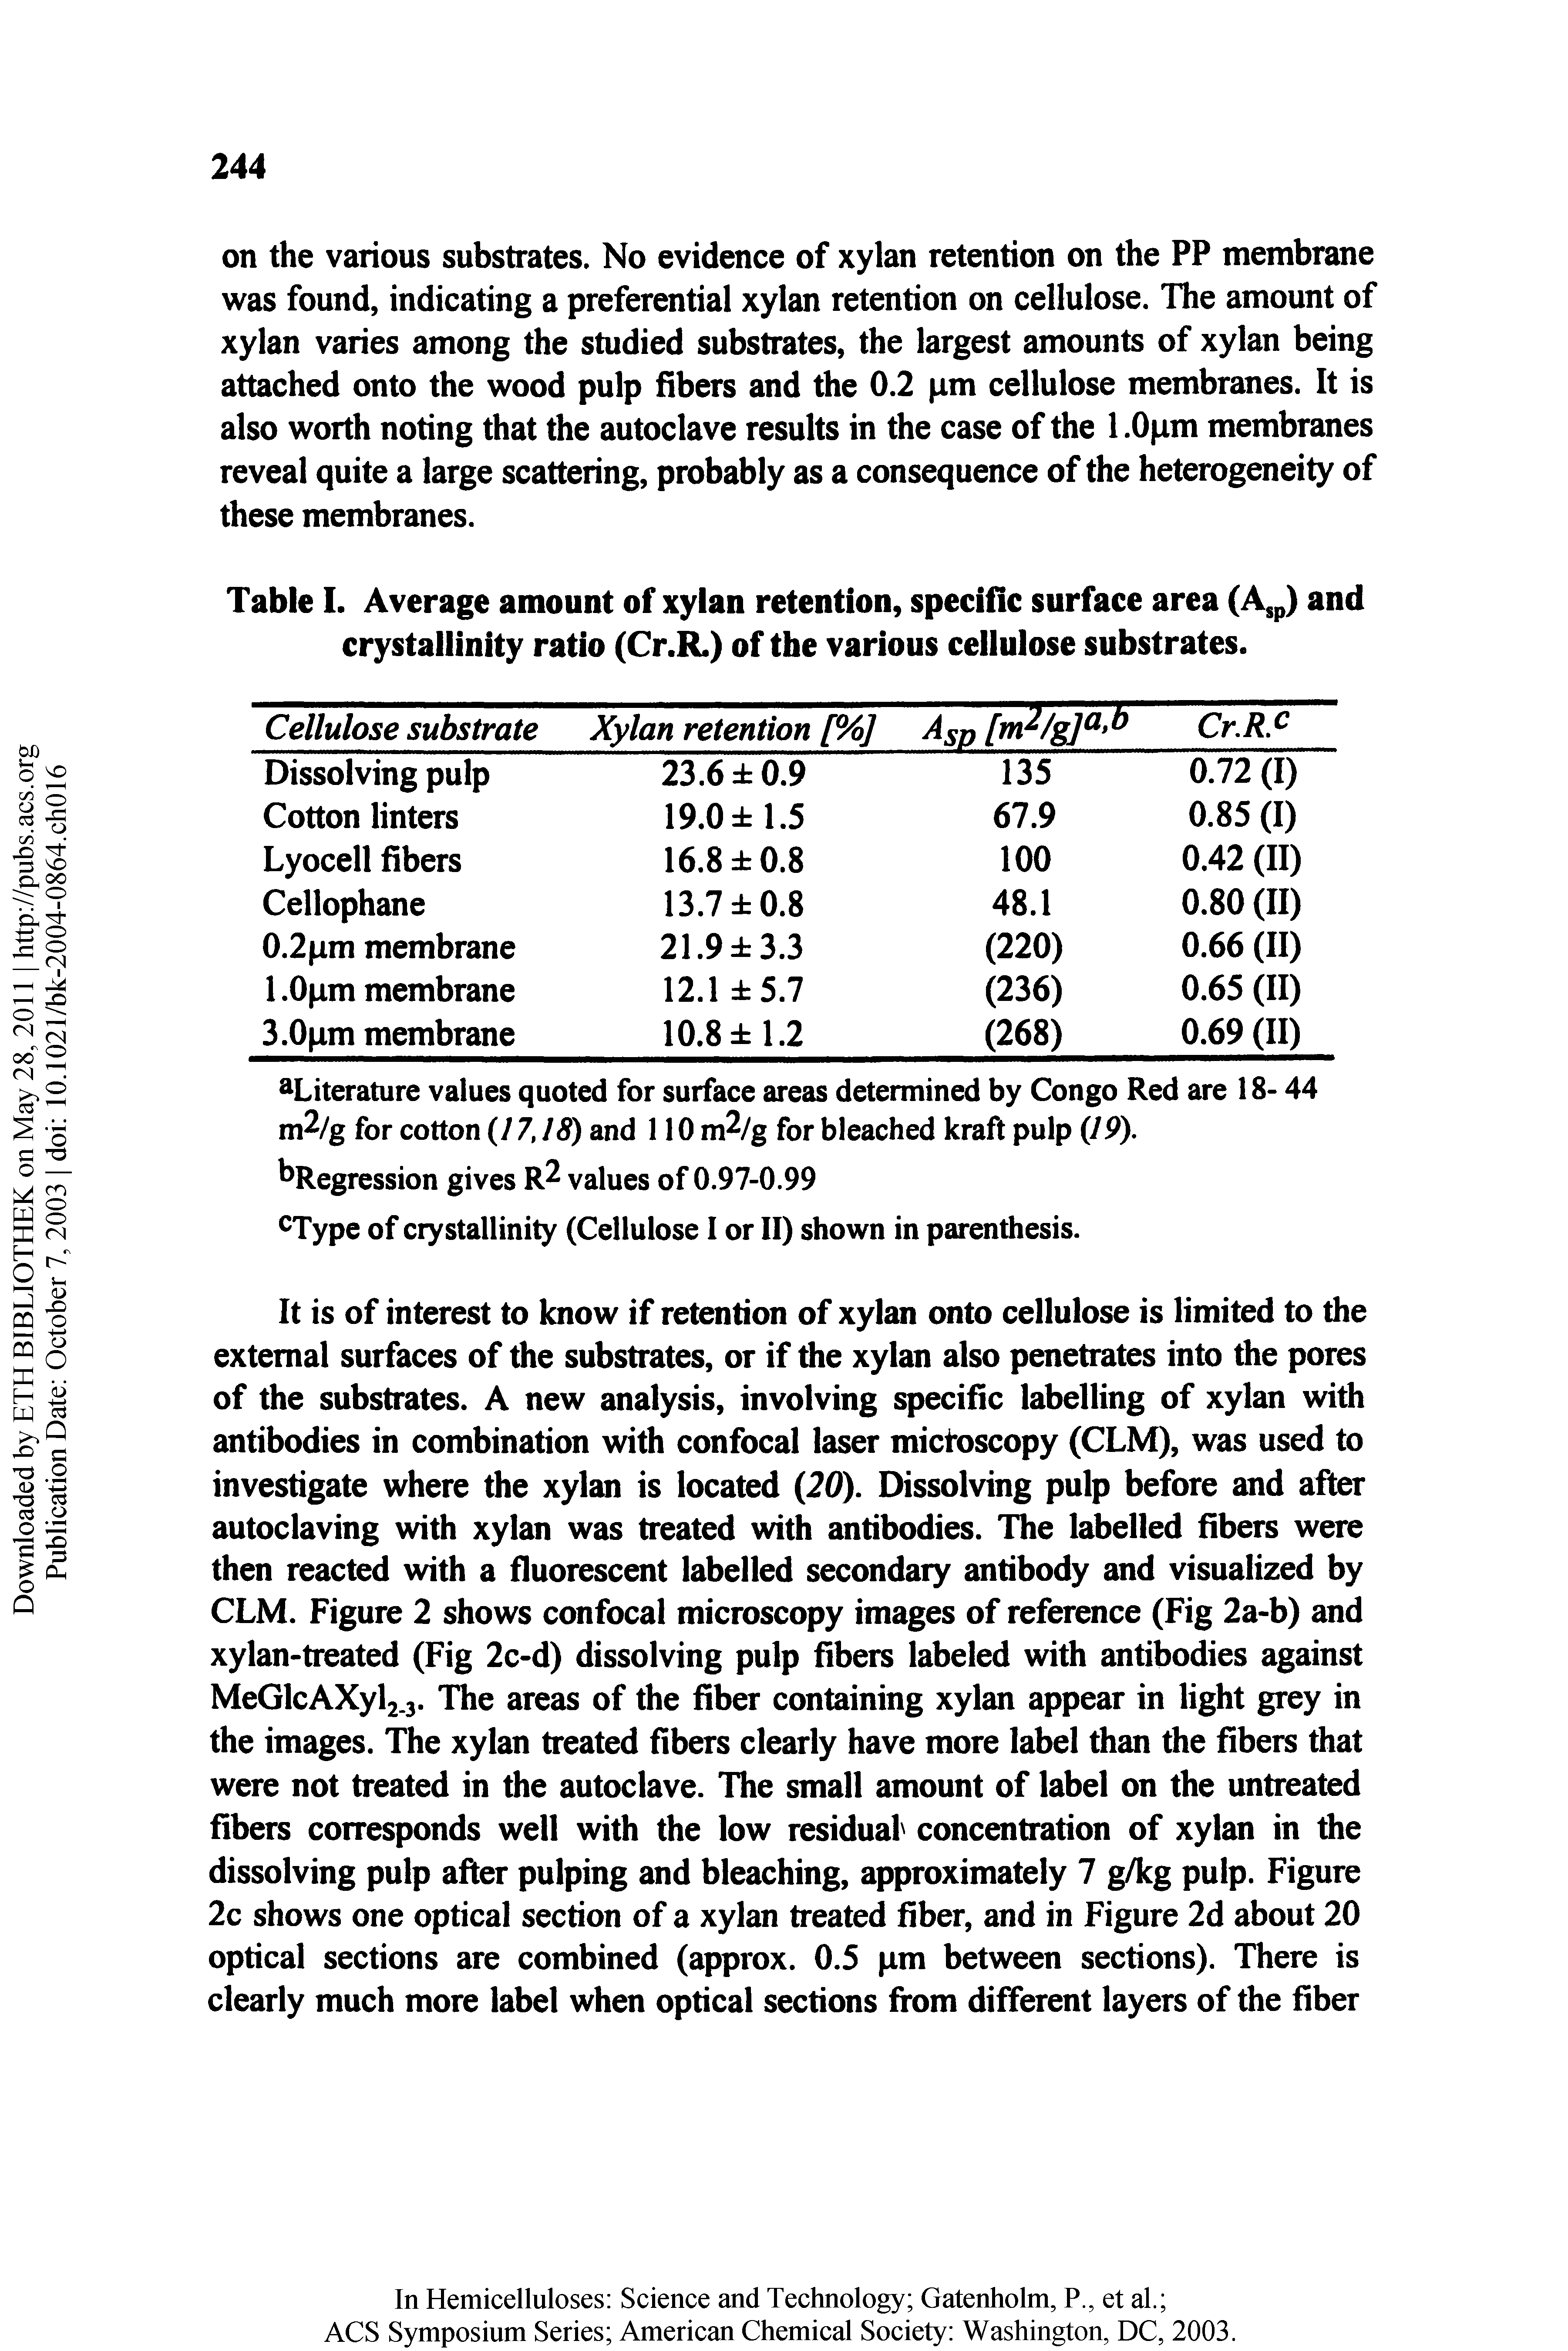 Table I. Average amount of xylan retention, specific surface area (A p) and crystallinity ratio (Cr.R.) of the various cellulose substrates.